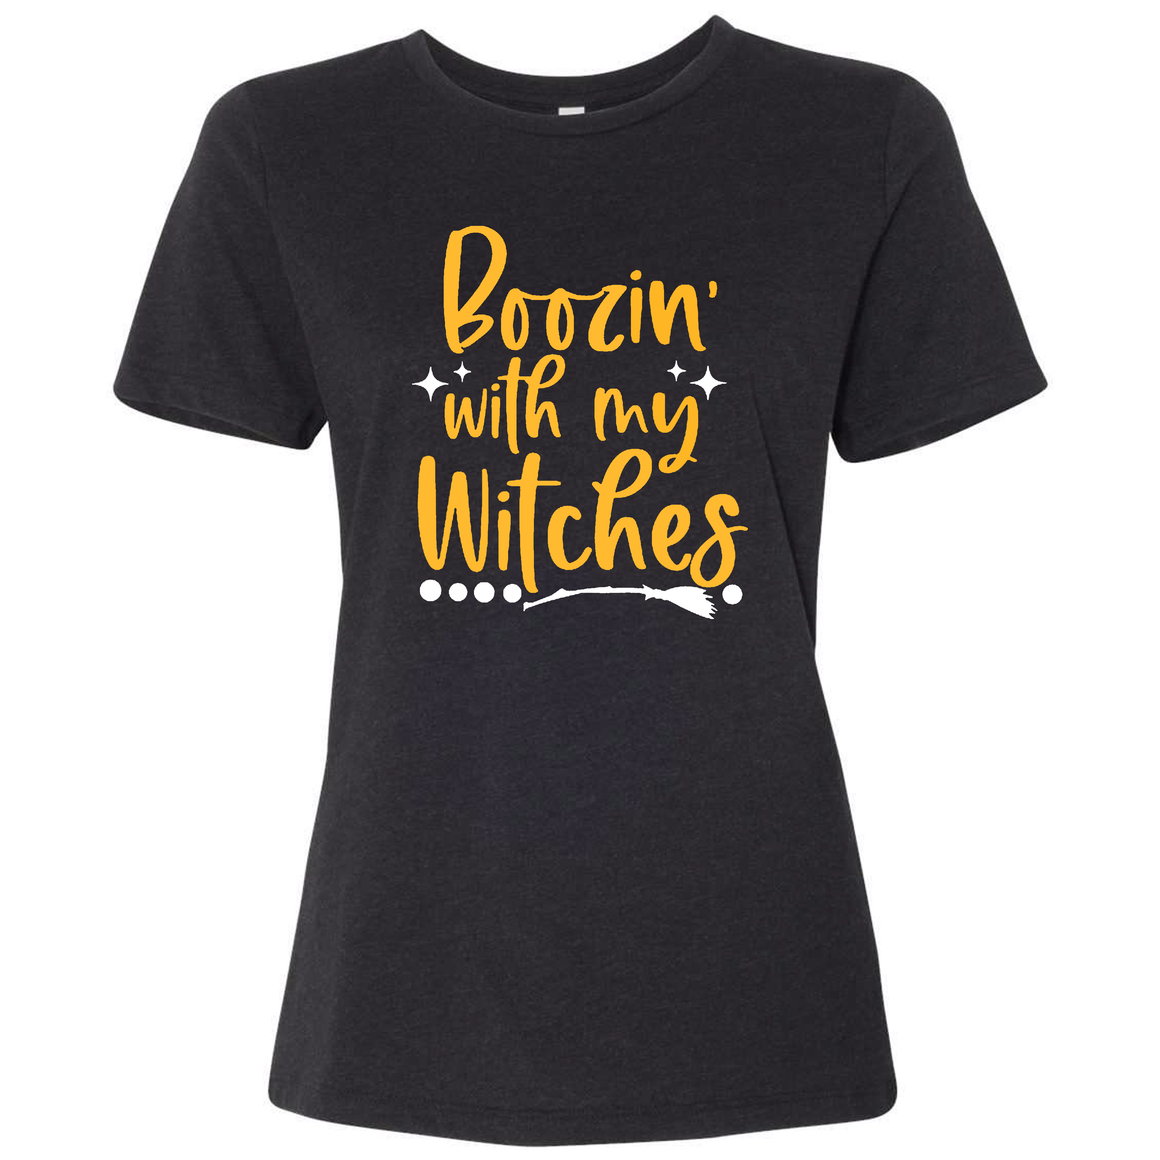 Triblend Women's Boozin With My Witches Crew Neck T-Shirt